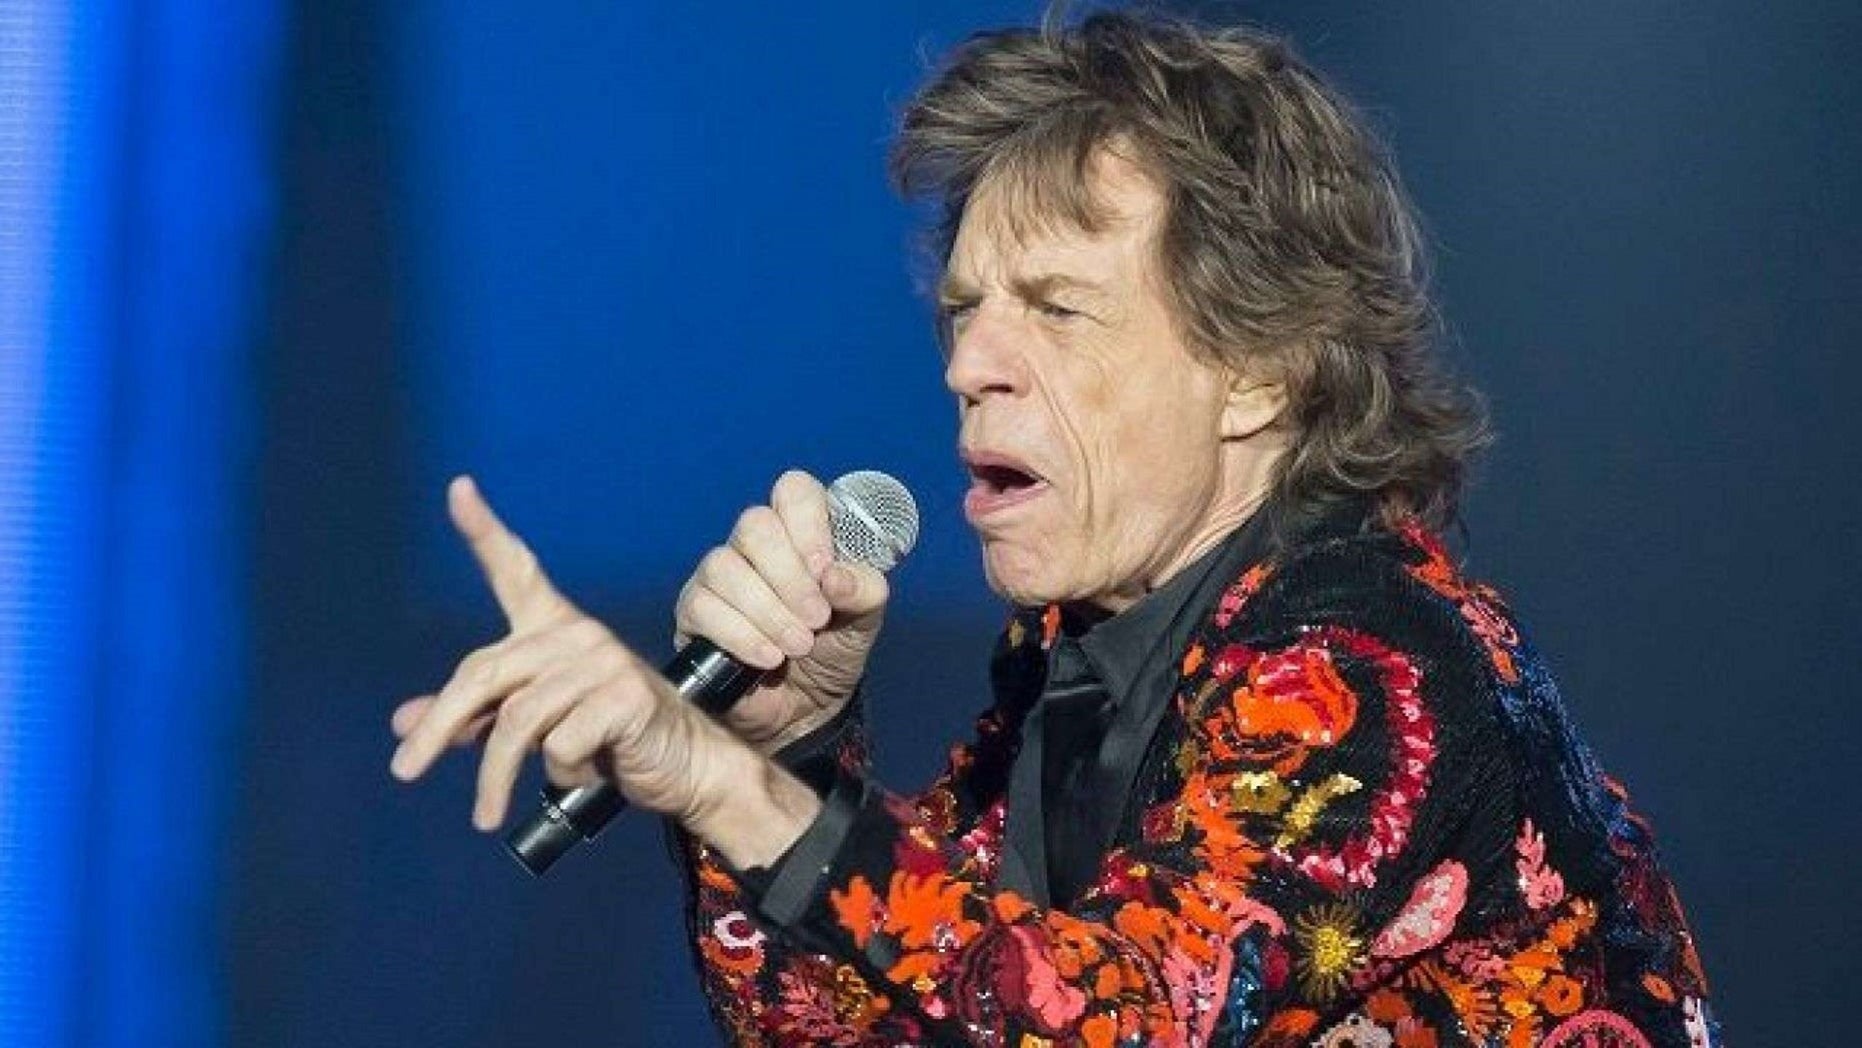 Mick Jagger To Undergo Heart Surgery In Nyc This Week Reports Say Fox News